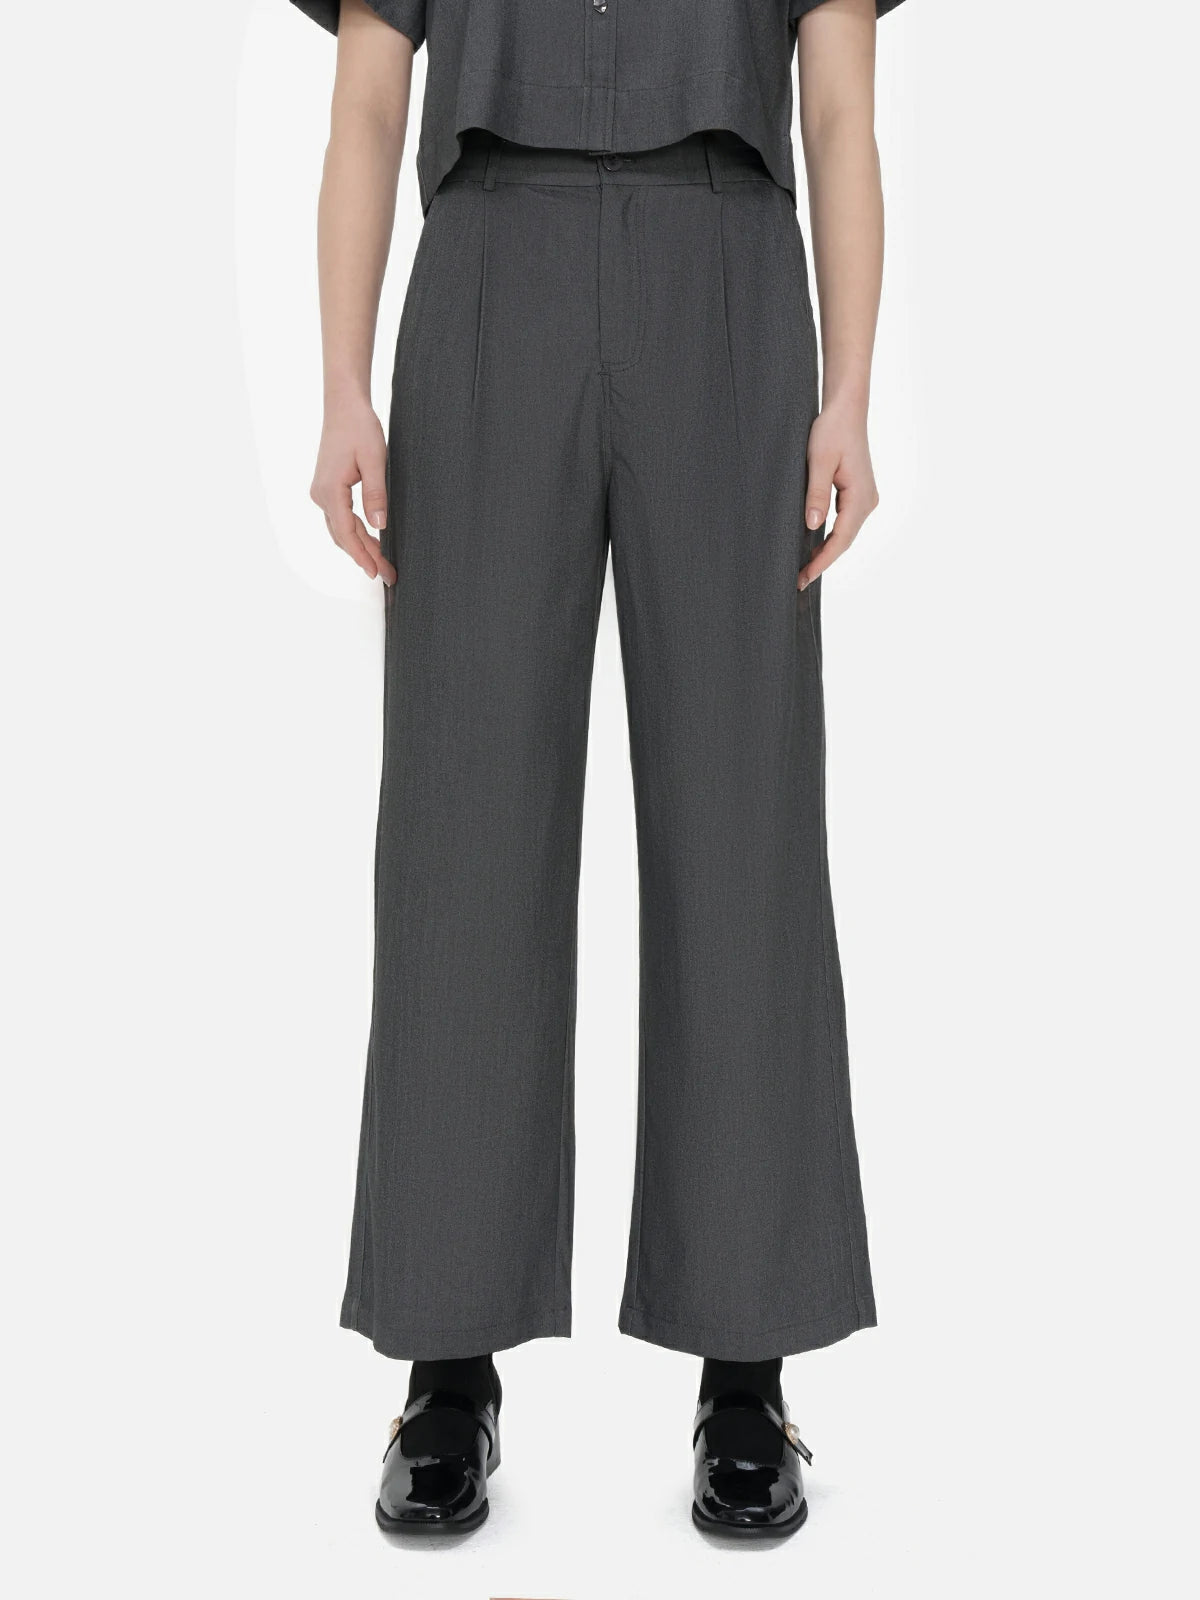 Classic gray wide-leg pants with a soft and comfortable texture for everyday wear